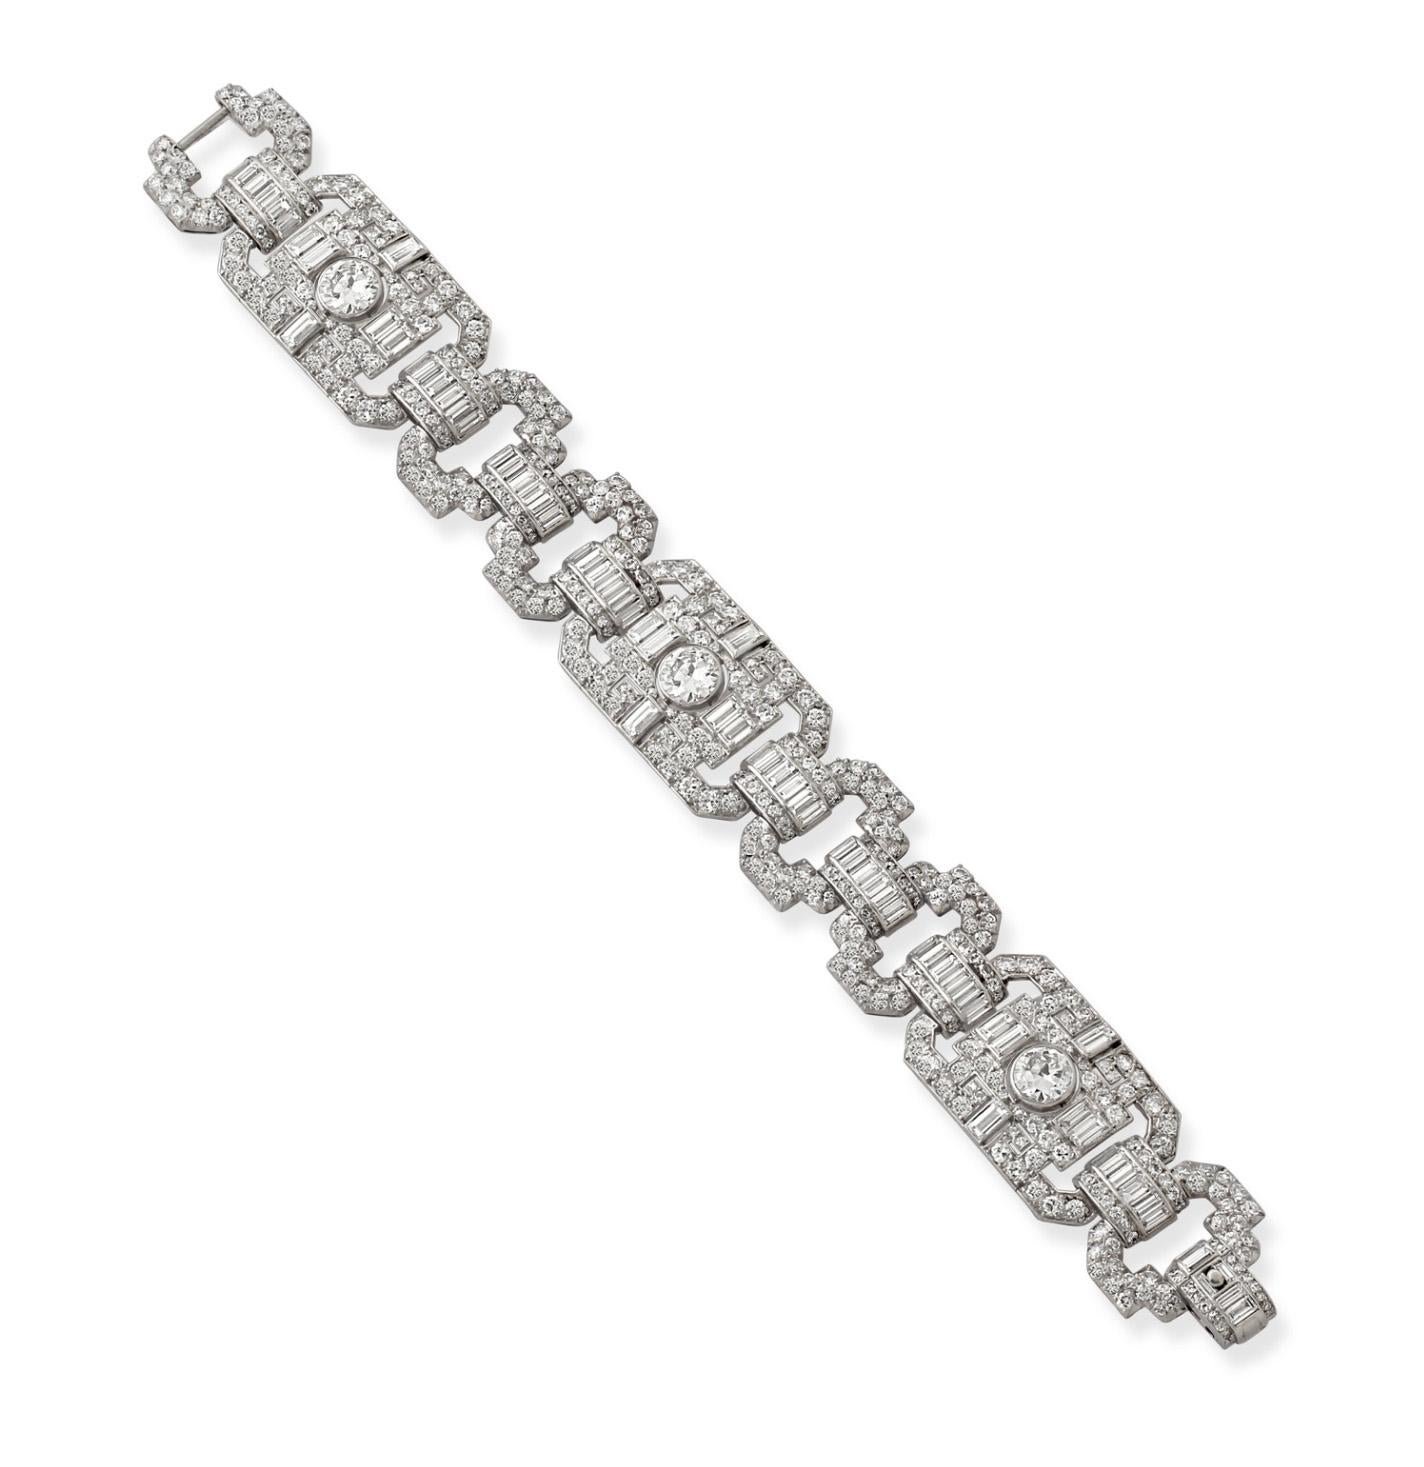 An Art Deco platinum and diamond bracelet by Janesich. The Italian jewellery firm, Janesich, is best known for its Art Deco pieces, but the family firm has roots in Italy, opening their first store in Trieste in 1835.

The bracelet is set with